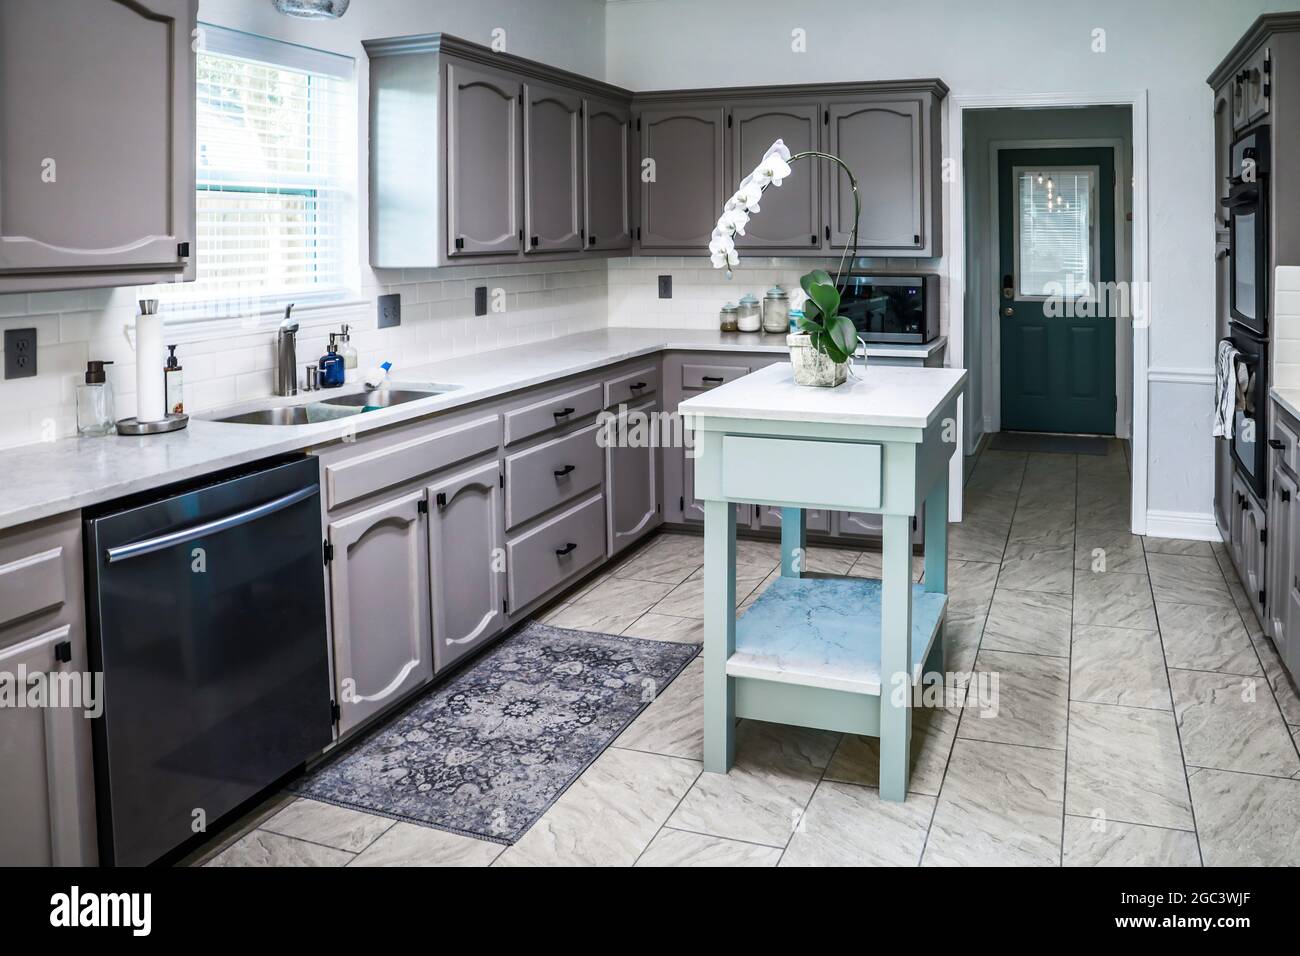 Compact kitchen with a small table and a comfortable cooking surface with  modern appliances and wall cabinets with floral wallpaper. Kitchen concept  Stock Photo - Alamy